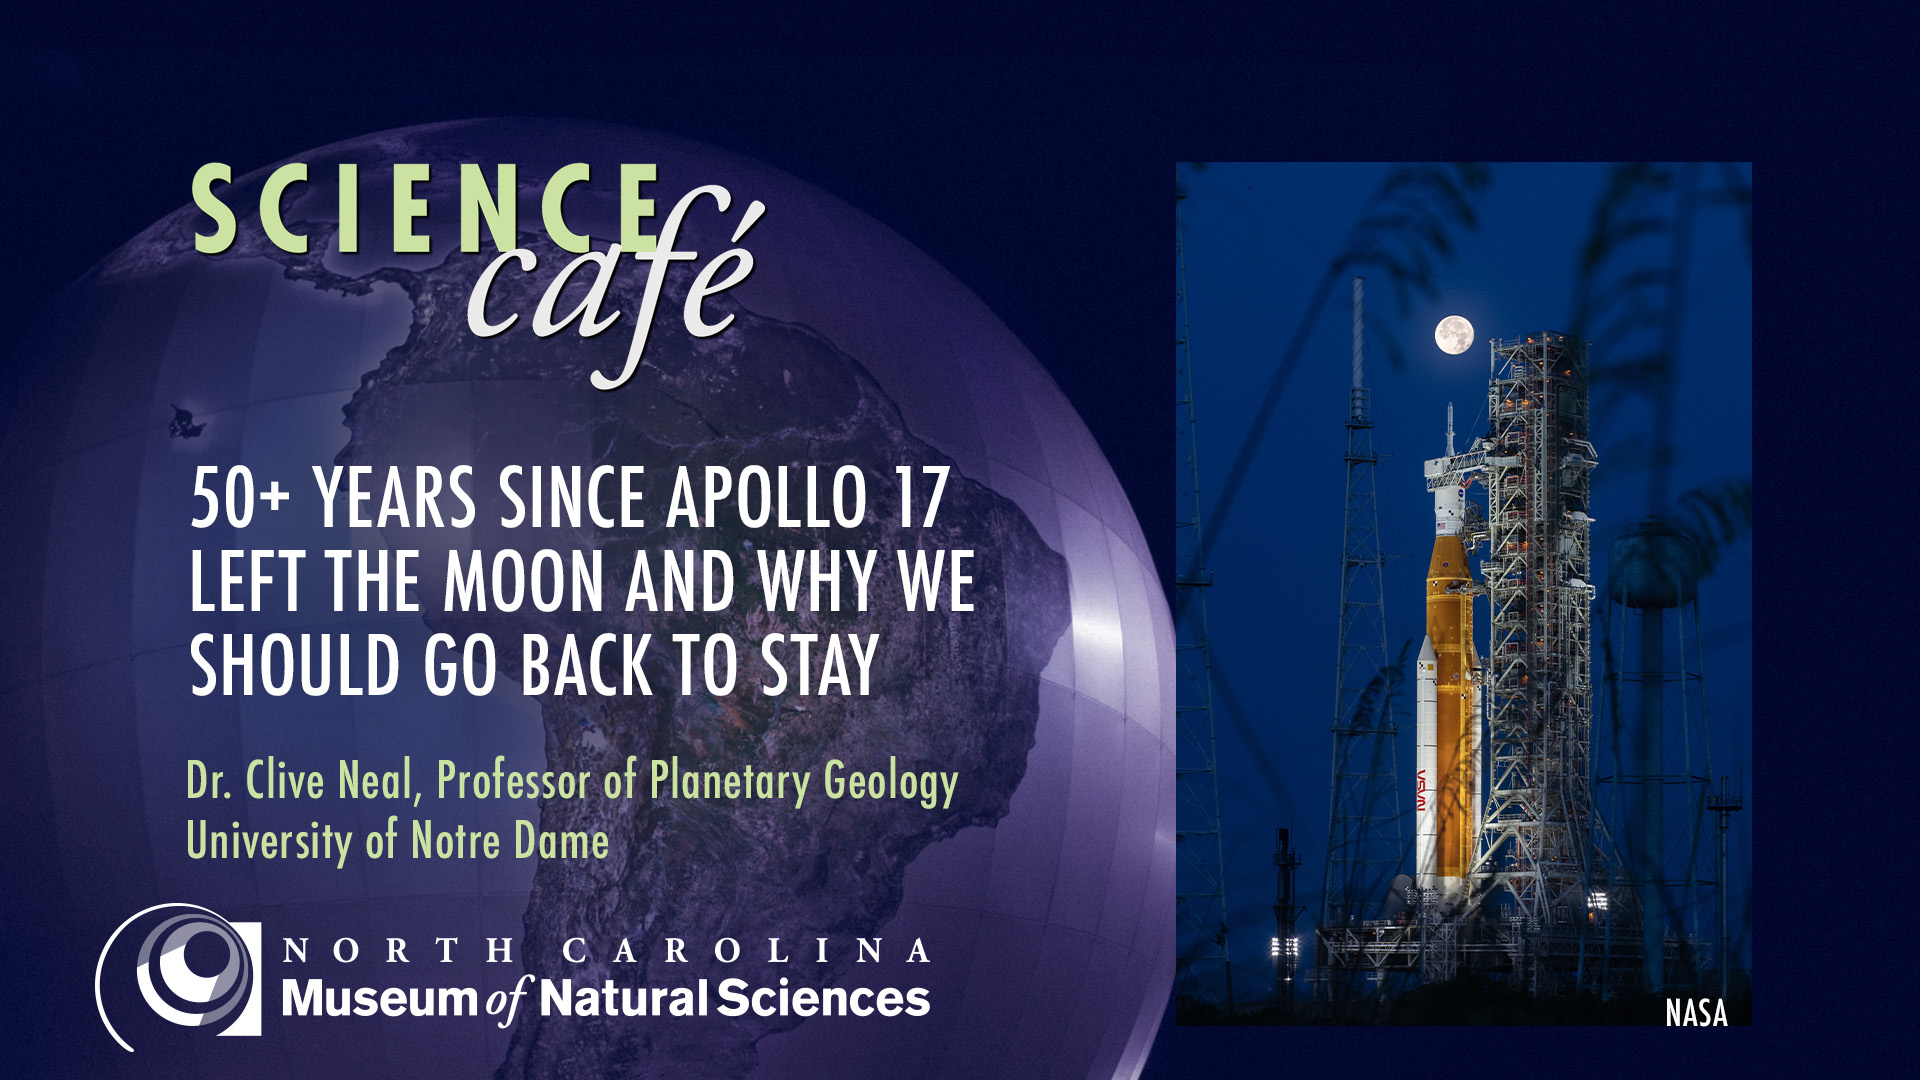 Science Cafe: 50+ Years Since Apollo 17 Left the Moon and Why We Should Go Back to Stay with Dr. Clive Neal, University of Notre Dame.